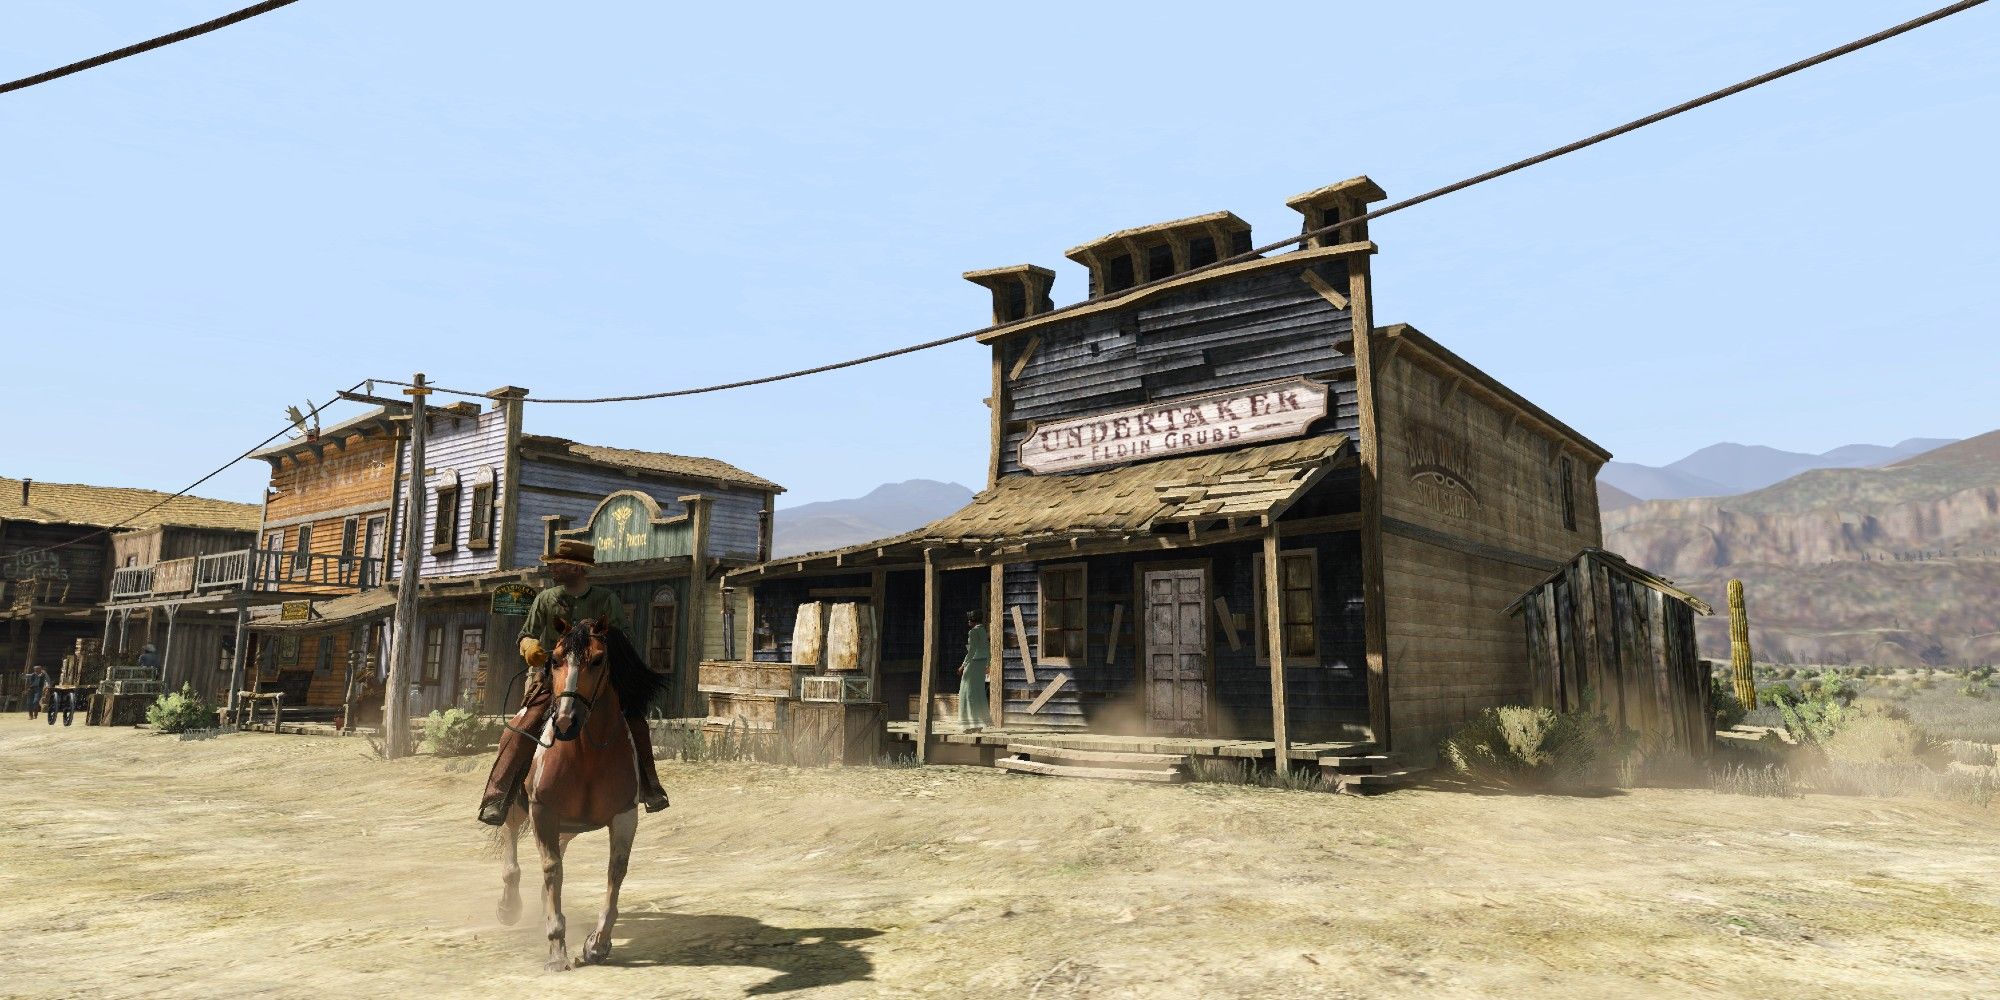 John riding a horse in front of Armadillo's undertaker building in RDR2.